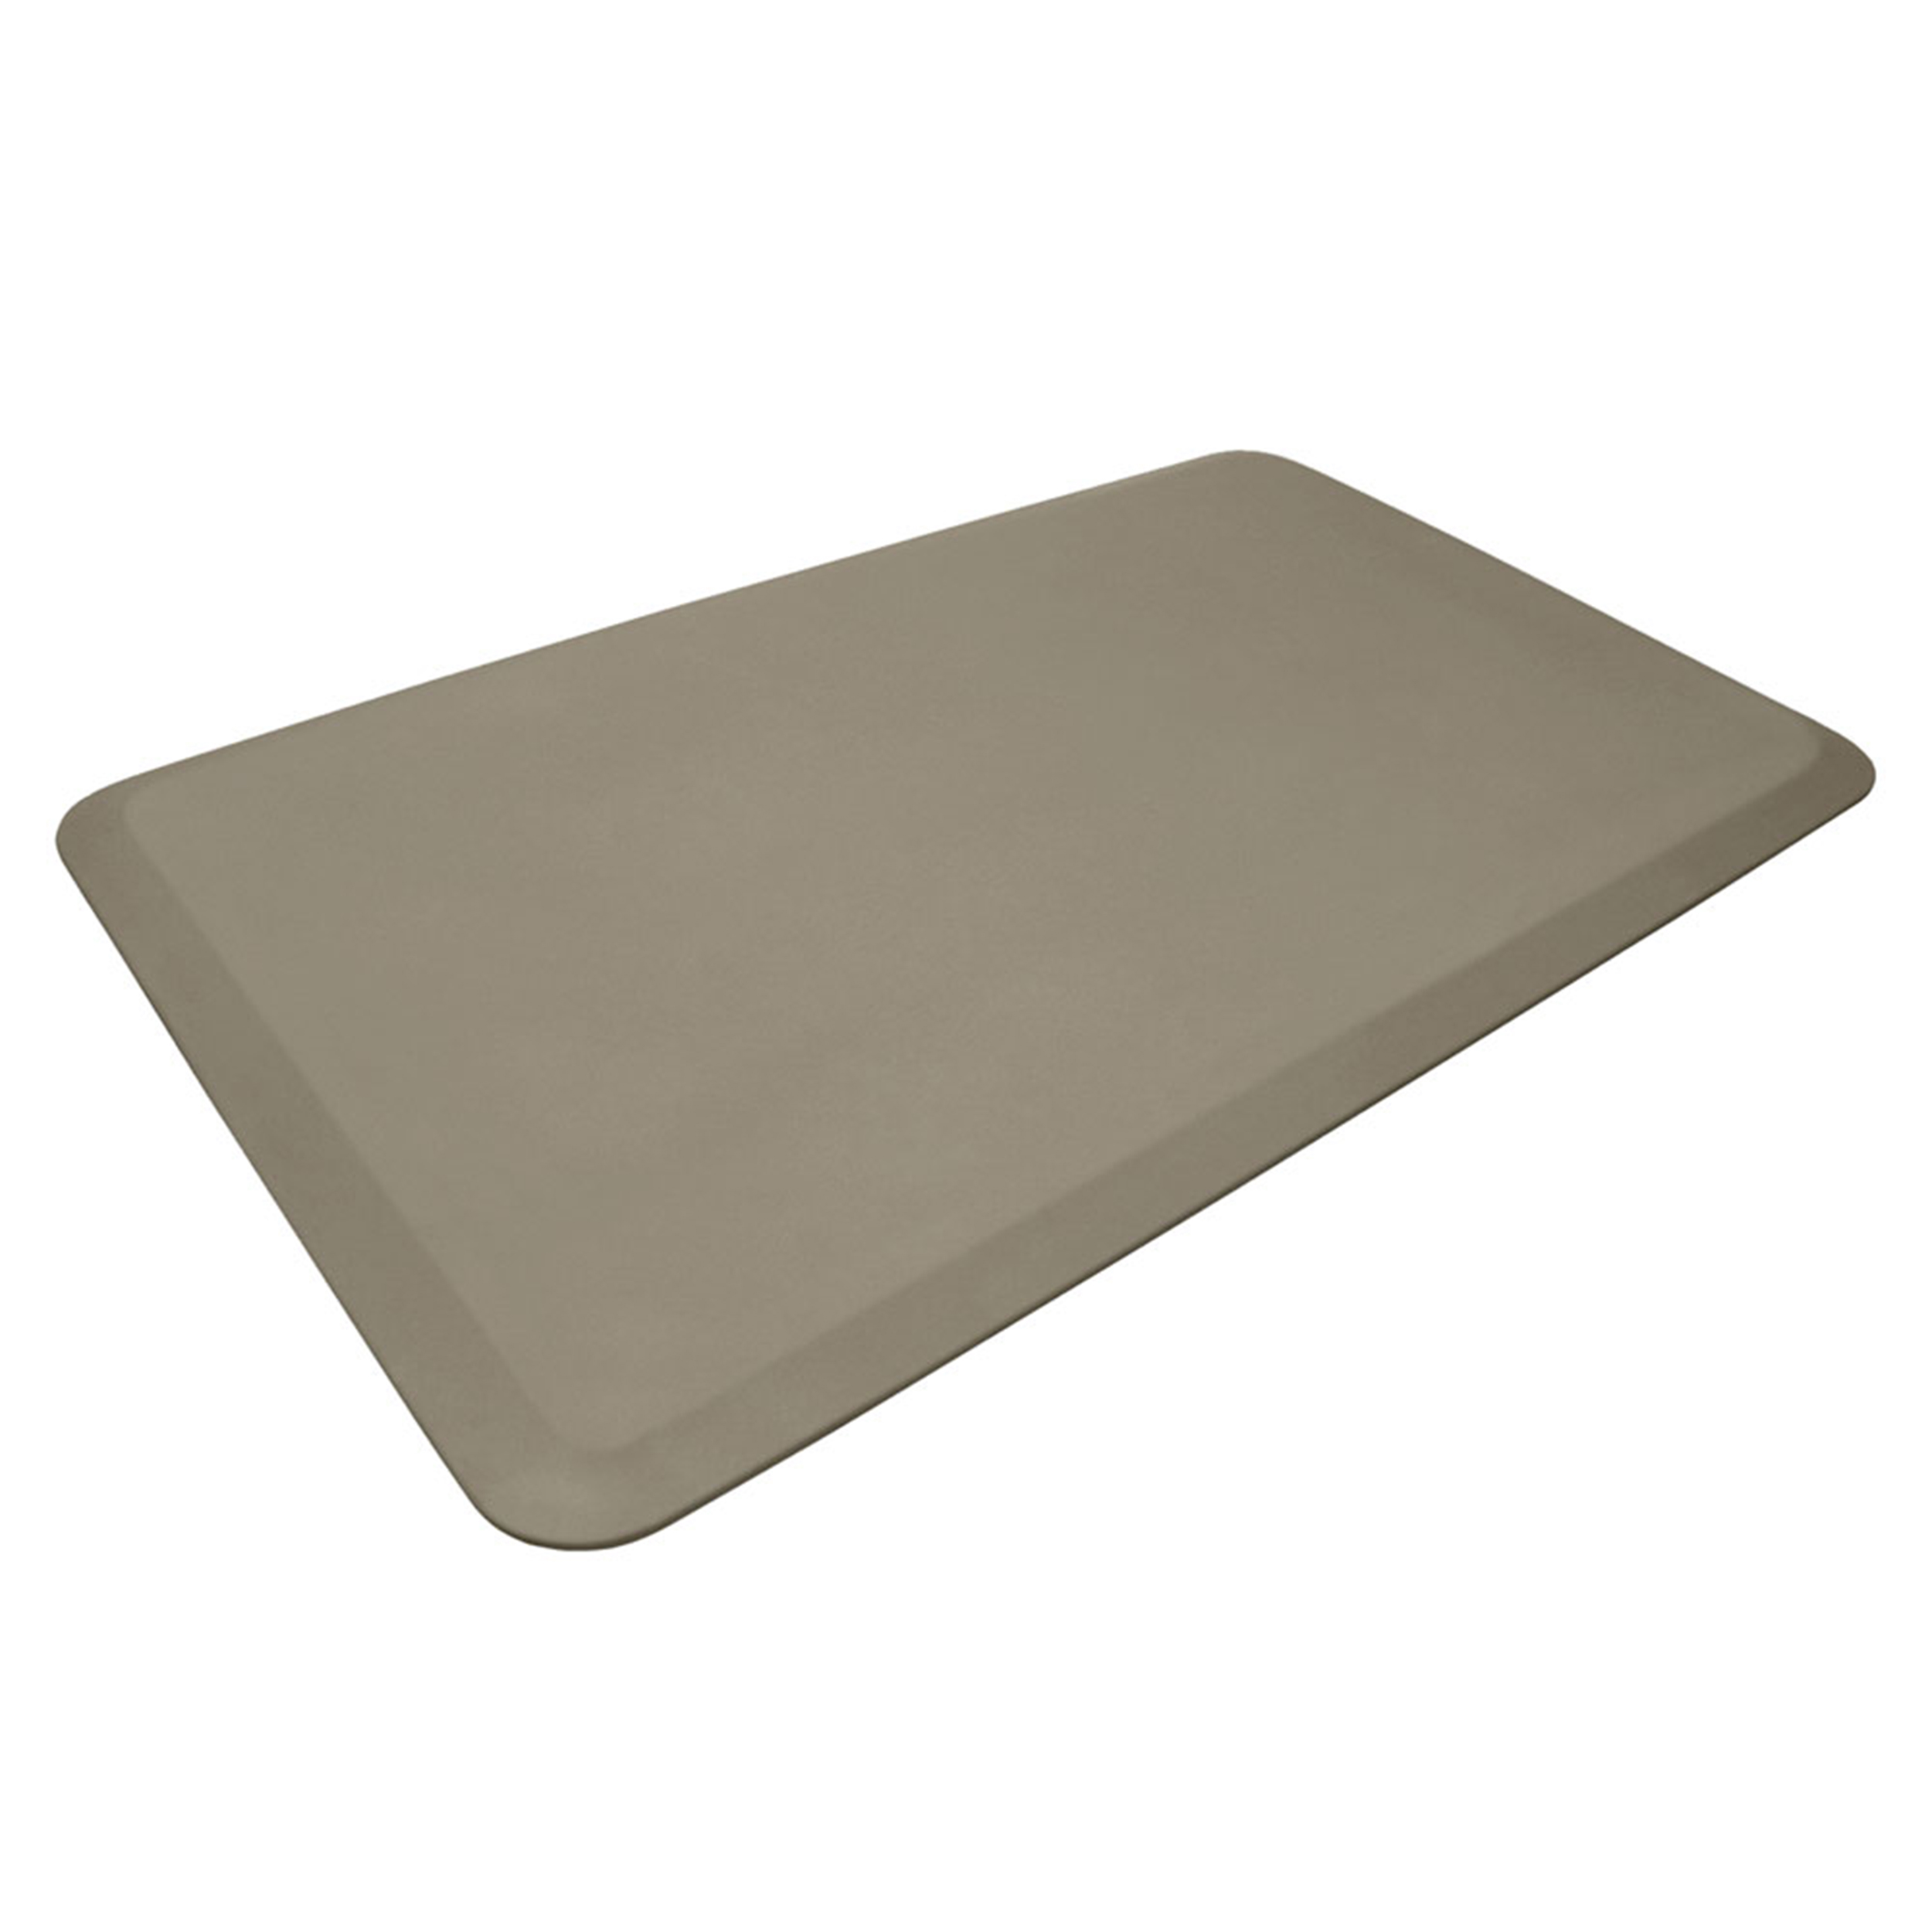 Eco-pro Commercial Mat, Taupe, 24" X 36"